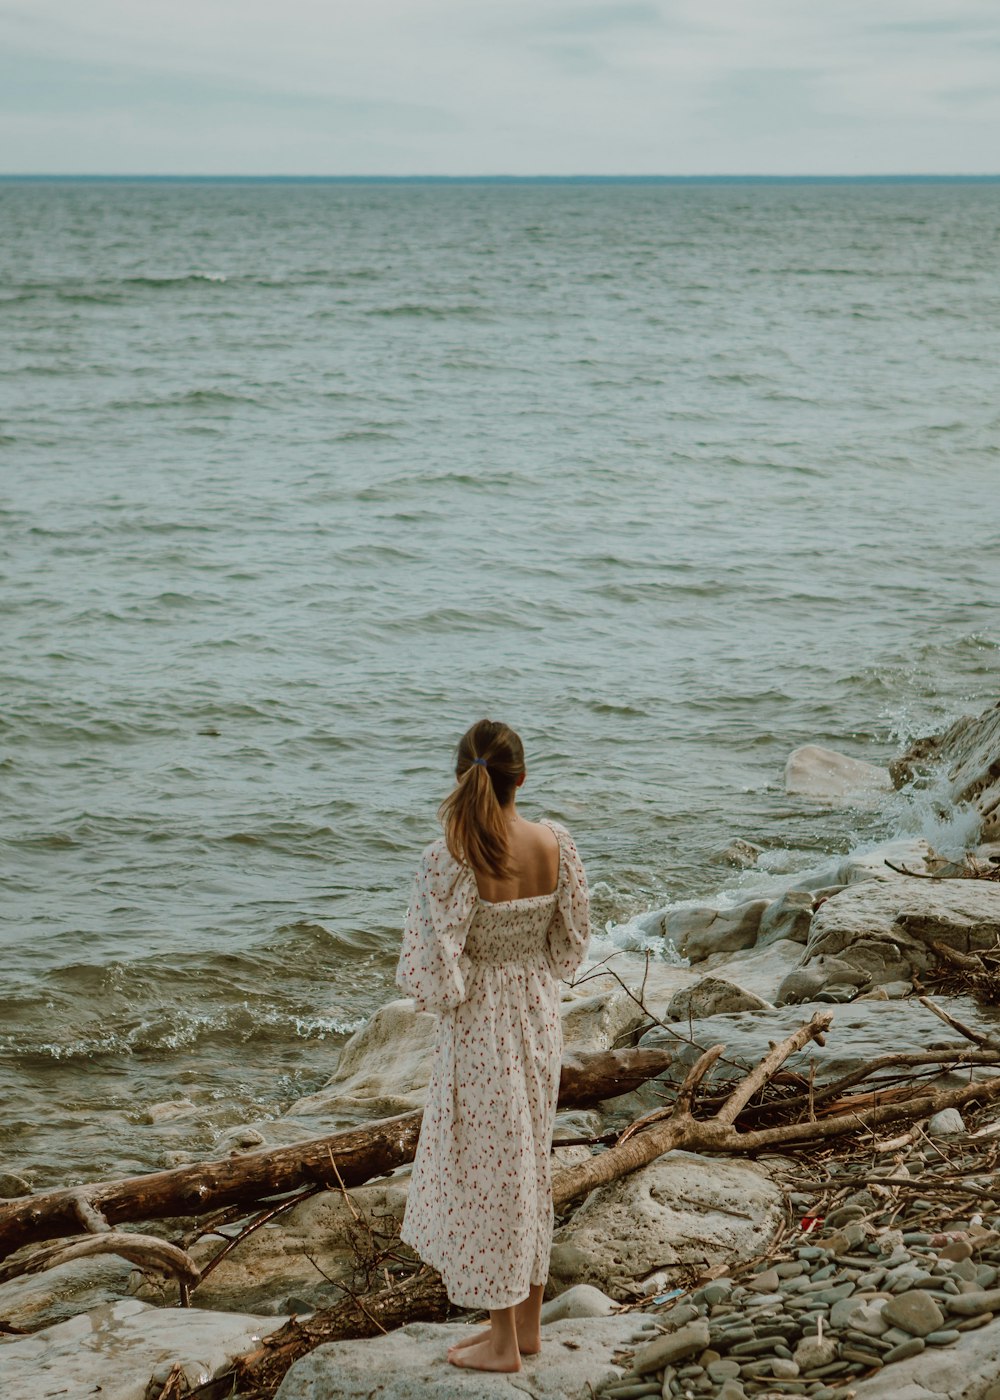 woman in white dress sitting on brown wood log on beach during daytime